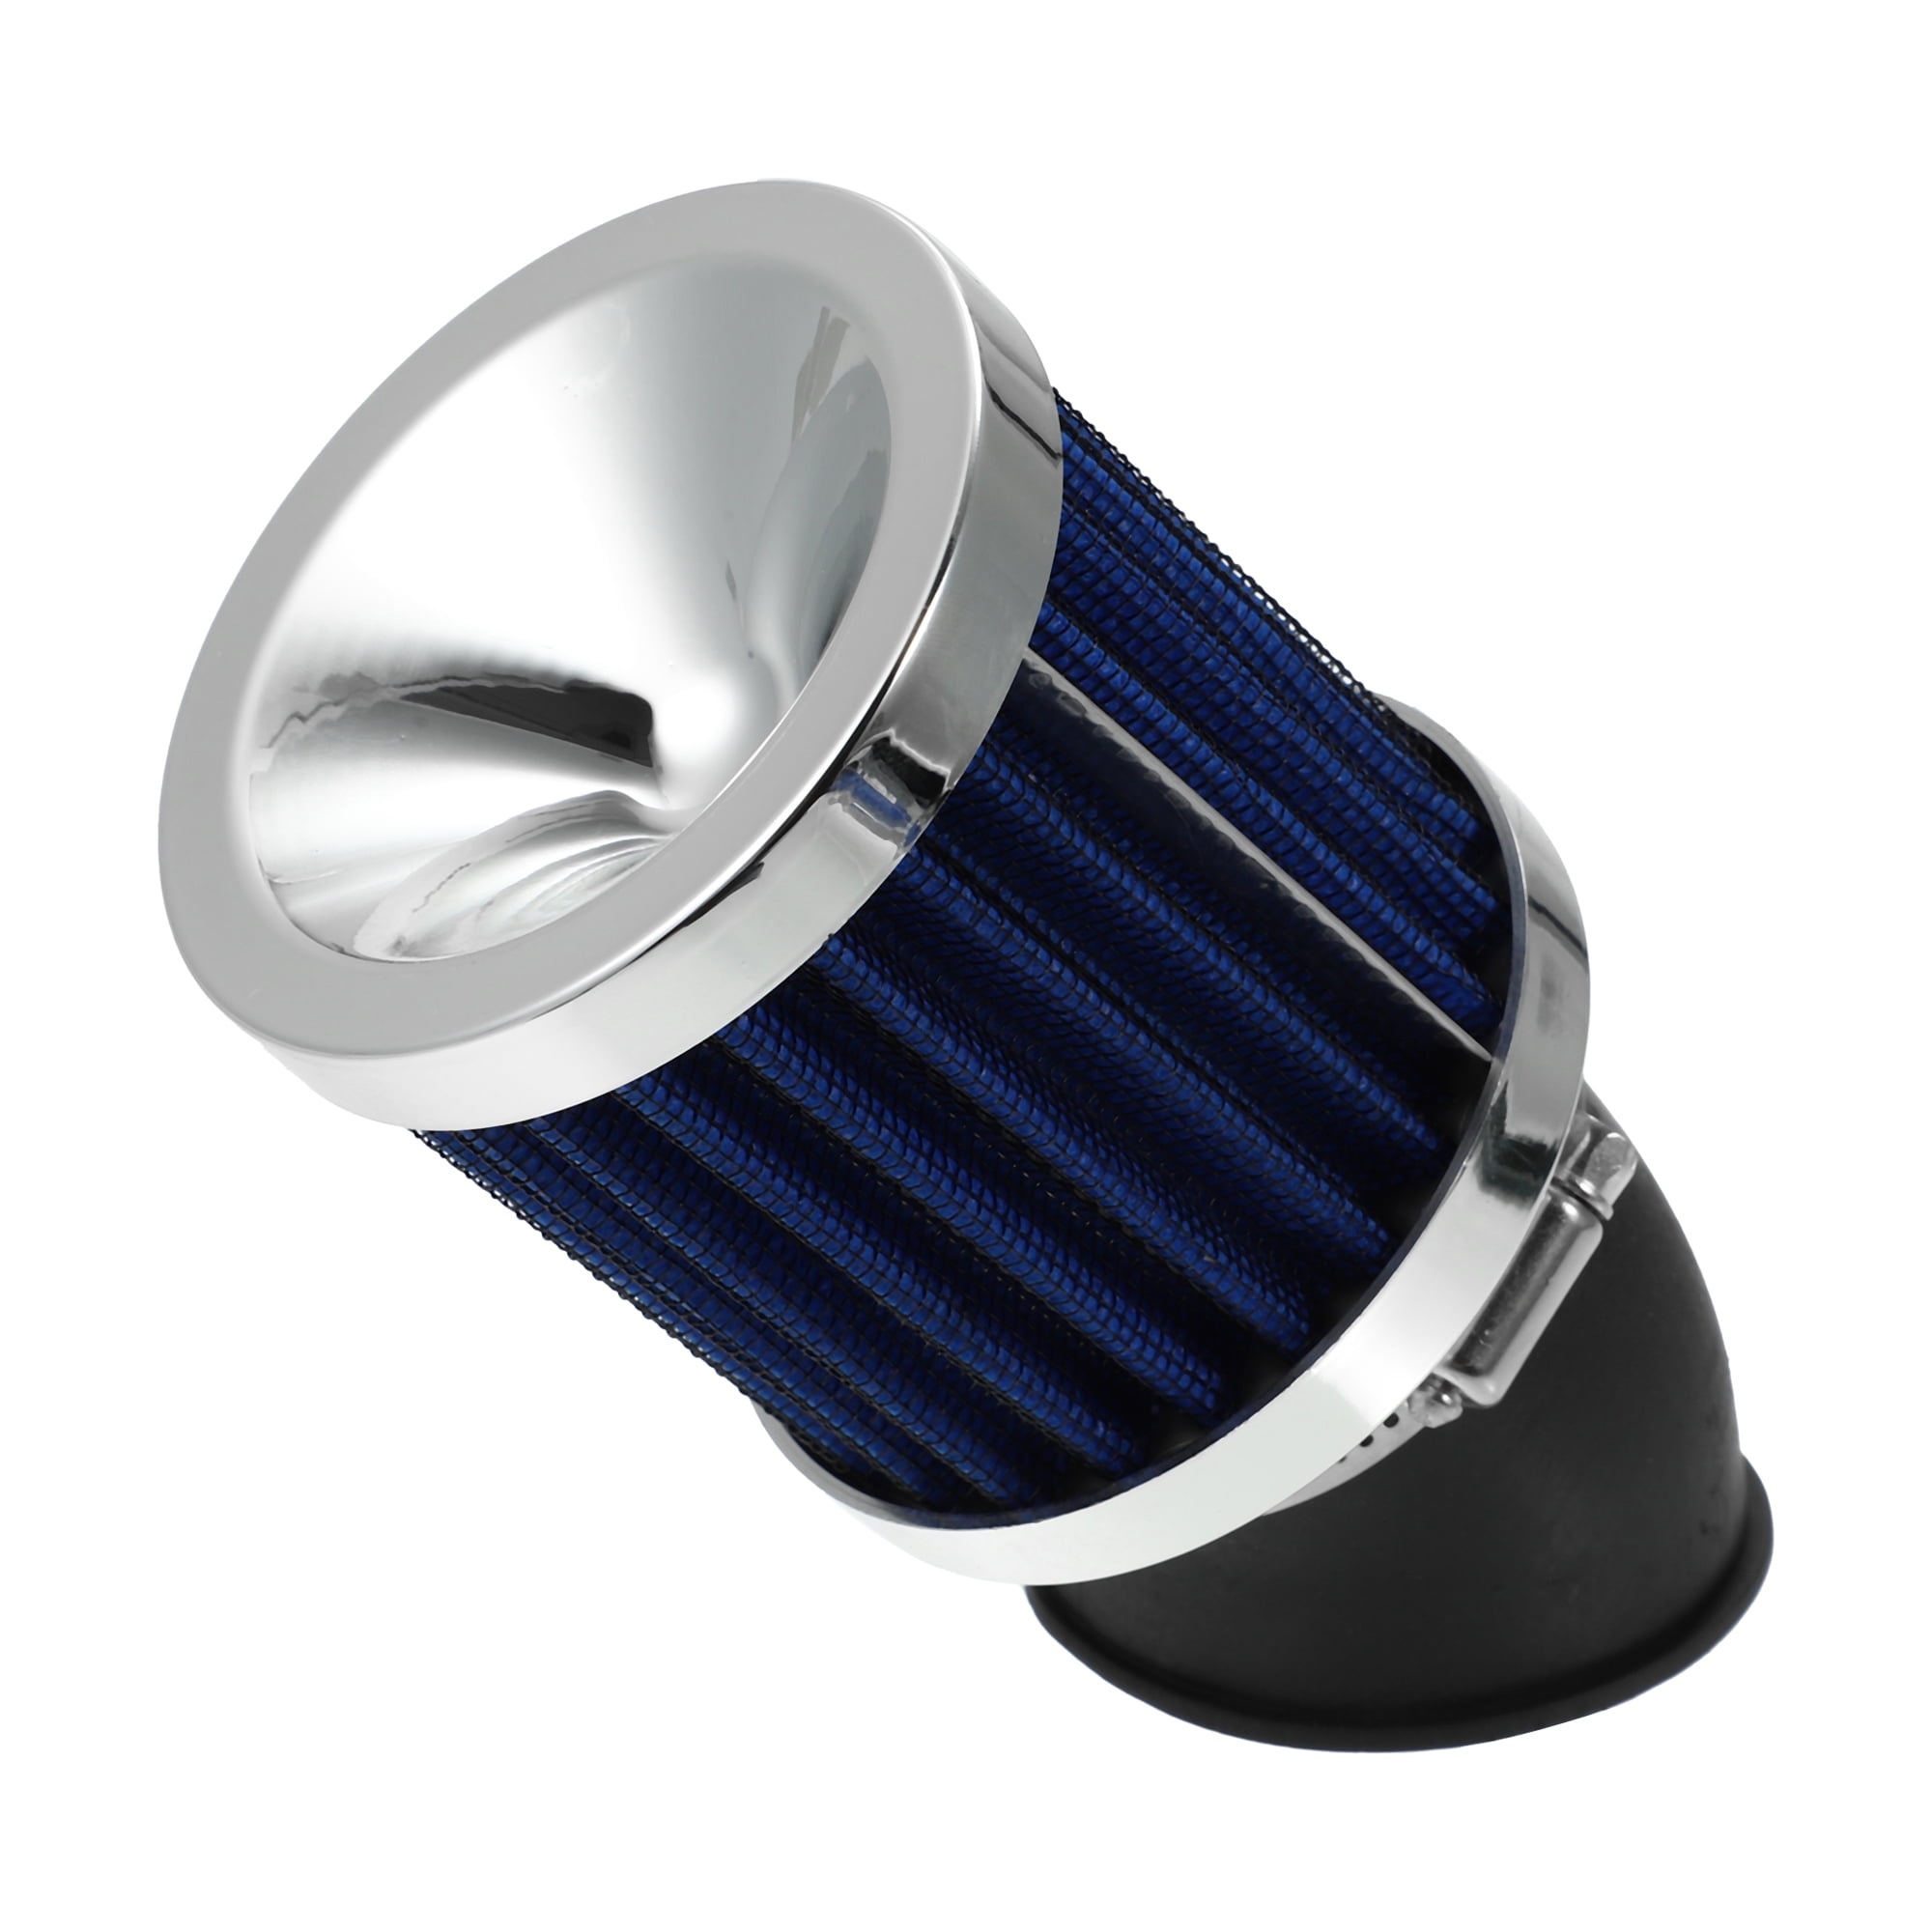 38Mm Air Filter Round Cone Universal Auto Cold Air Intake Induction Kit For  Off-Road Motorcycle Atv Four Pit Bike(Blue) 